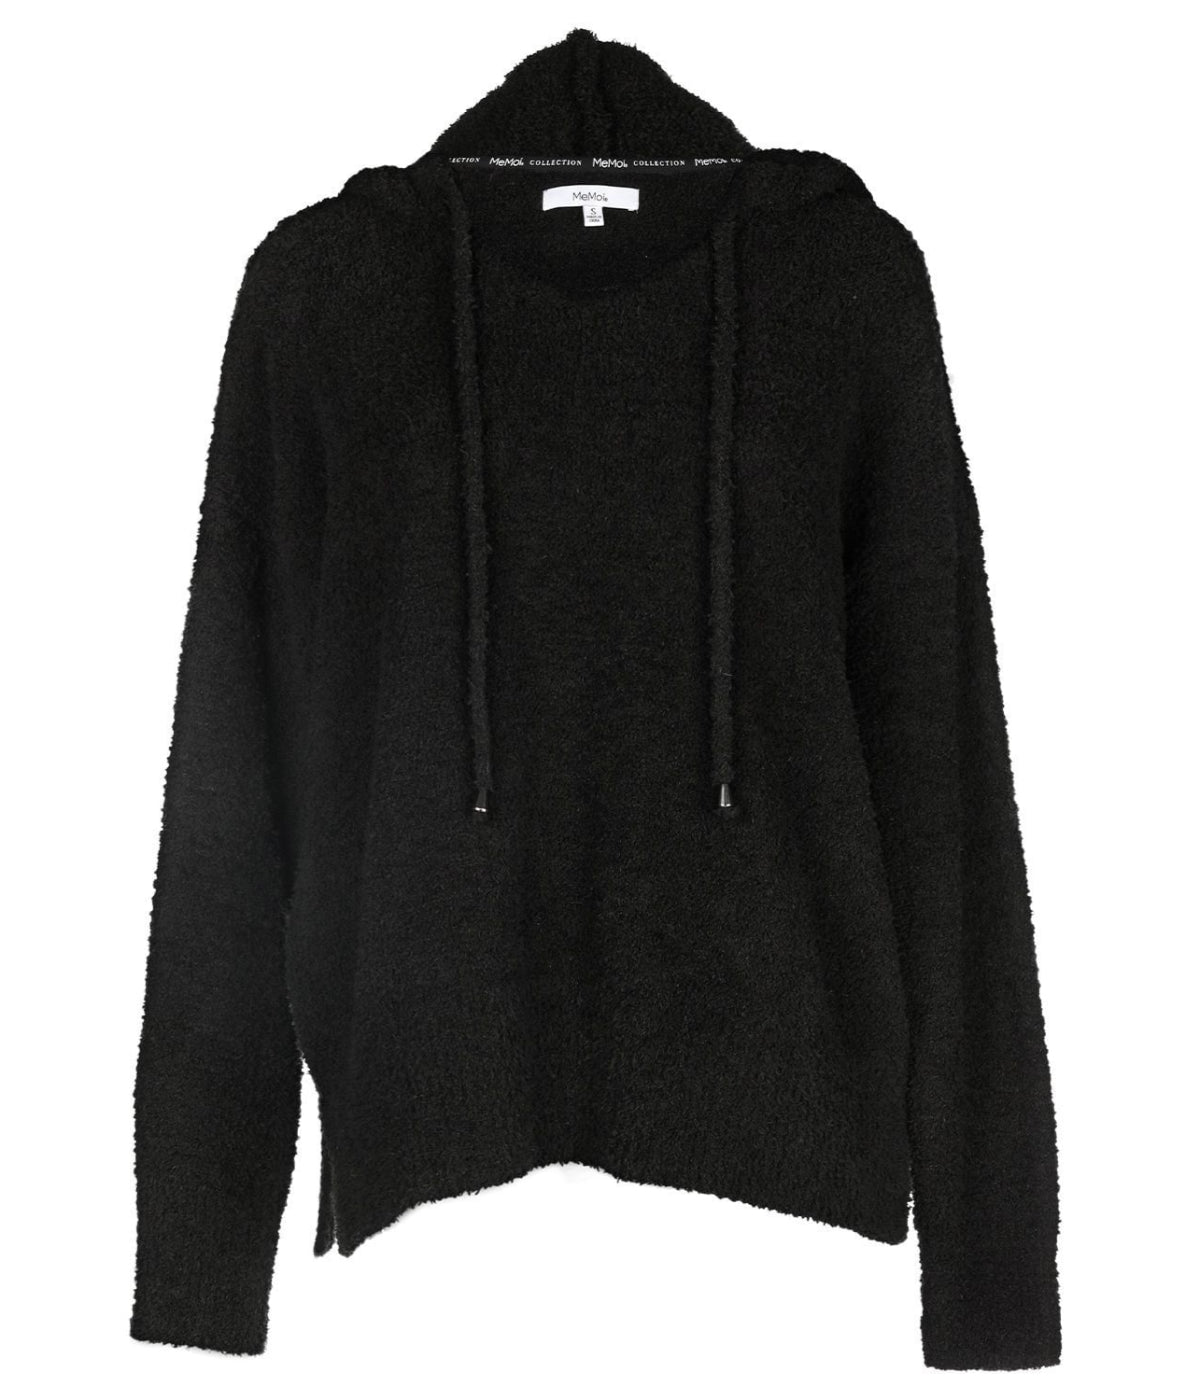 Women's Soft Touch Cozy Knit Drawstring Long Sleeve Hoodie Black